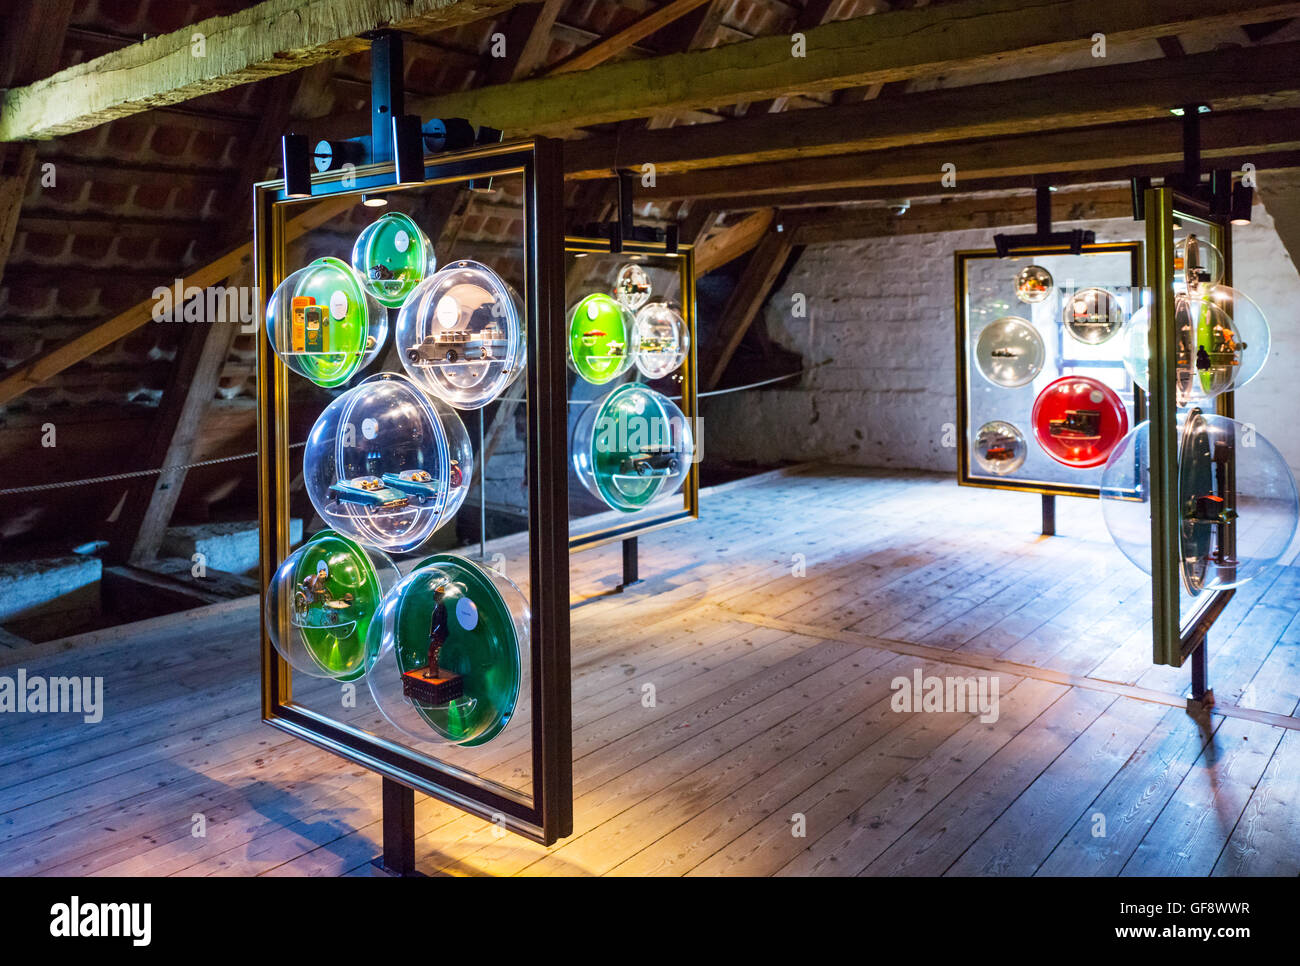 Kvaerndrup, Denmark - July 21, 2015: Art works with cars models in the attic of the Egeskov castle Stock Photo